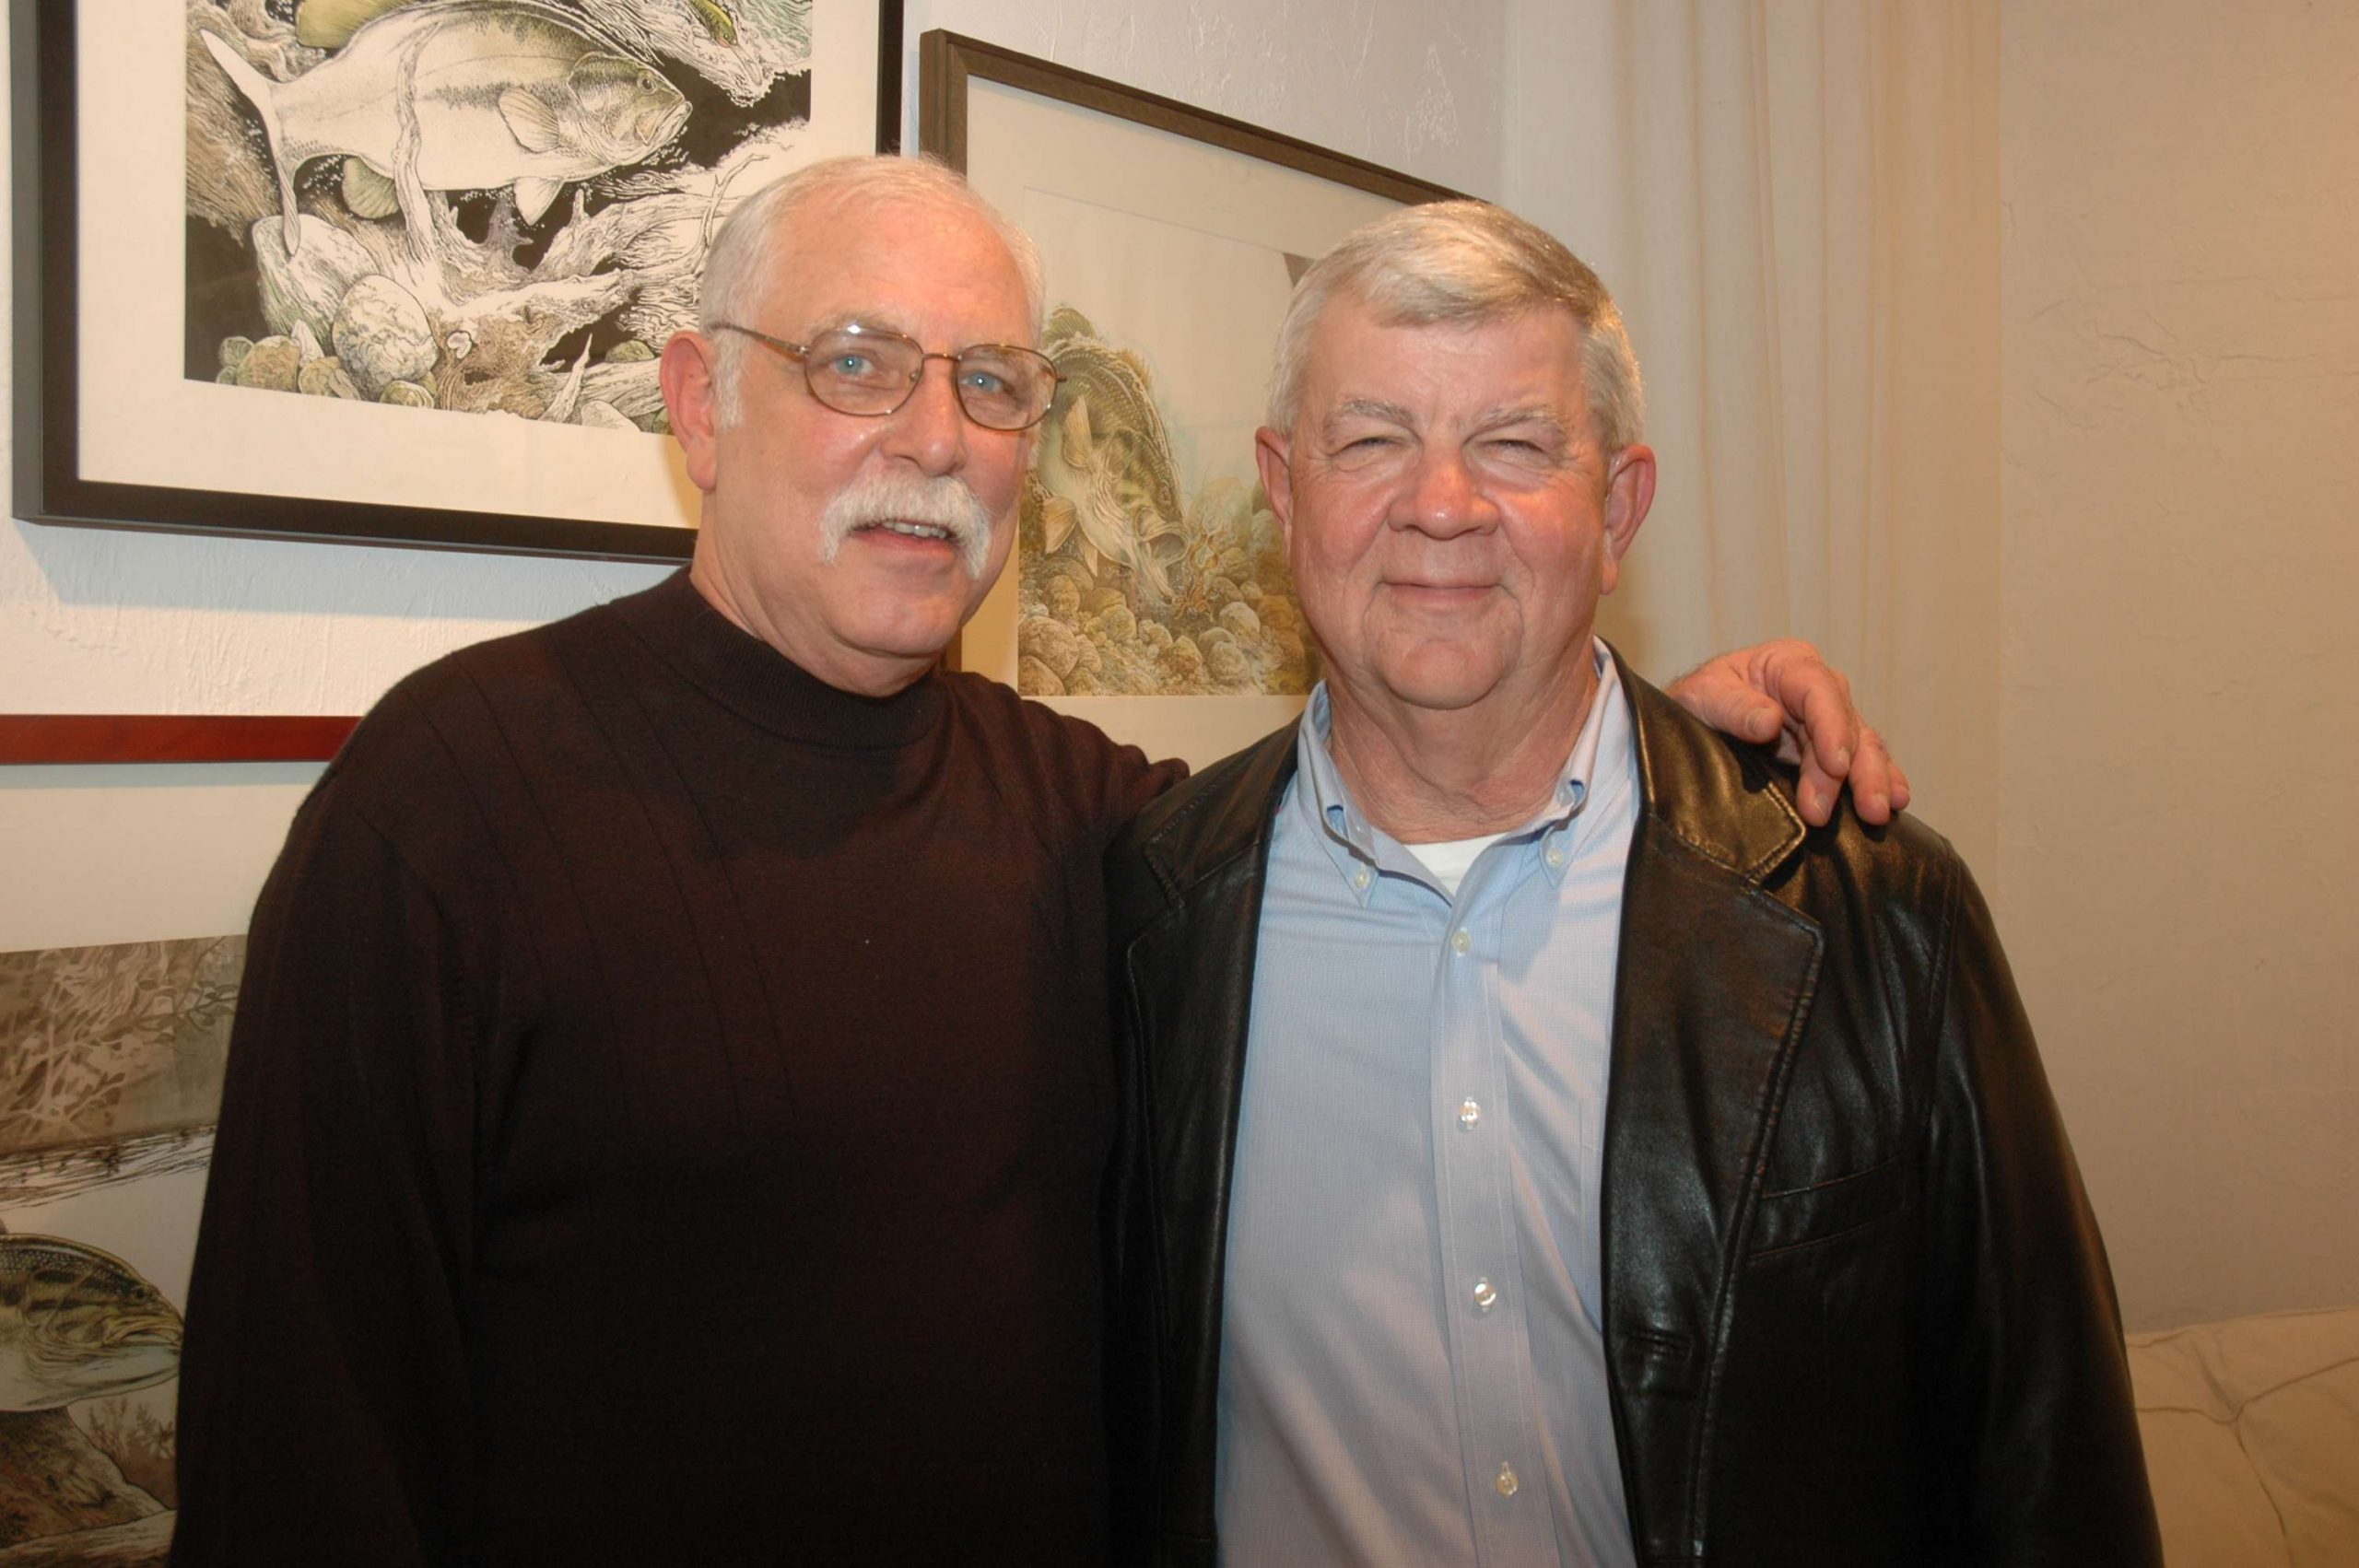 <p>Chris Armstrong, left, and Dave Precht go way back. Precht was the first editor at B.A.S.S. to hire Armstrong for his illustrations. He recognized Armstrong's incredible talent, and soon, the rest of the fishing and hunting world did, too. Read more about Armstrong <a href=